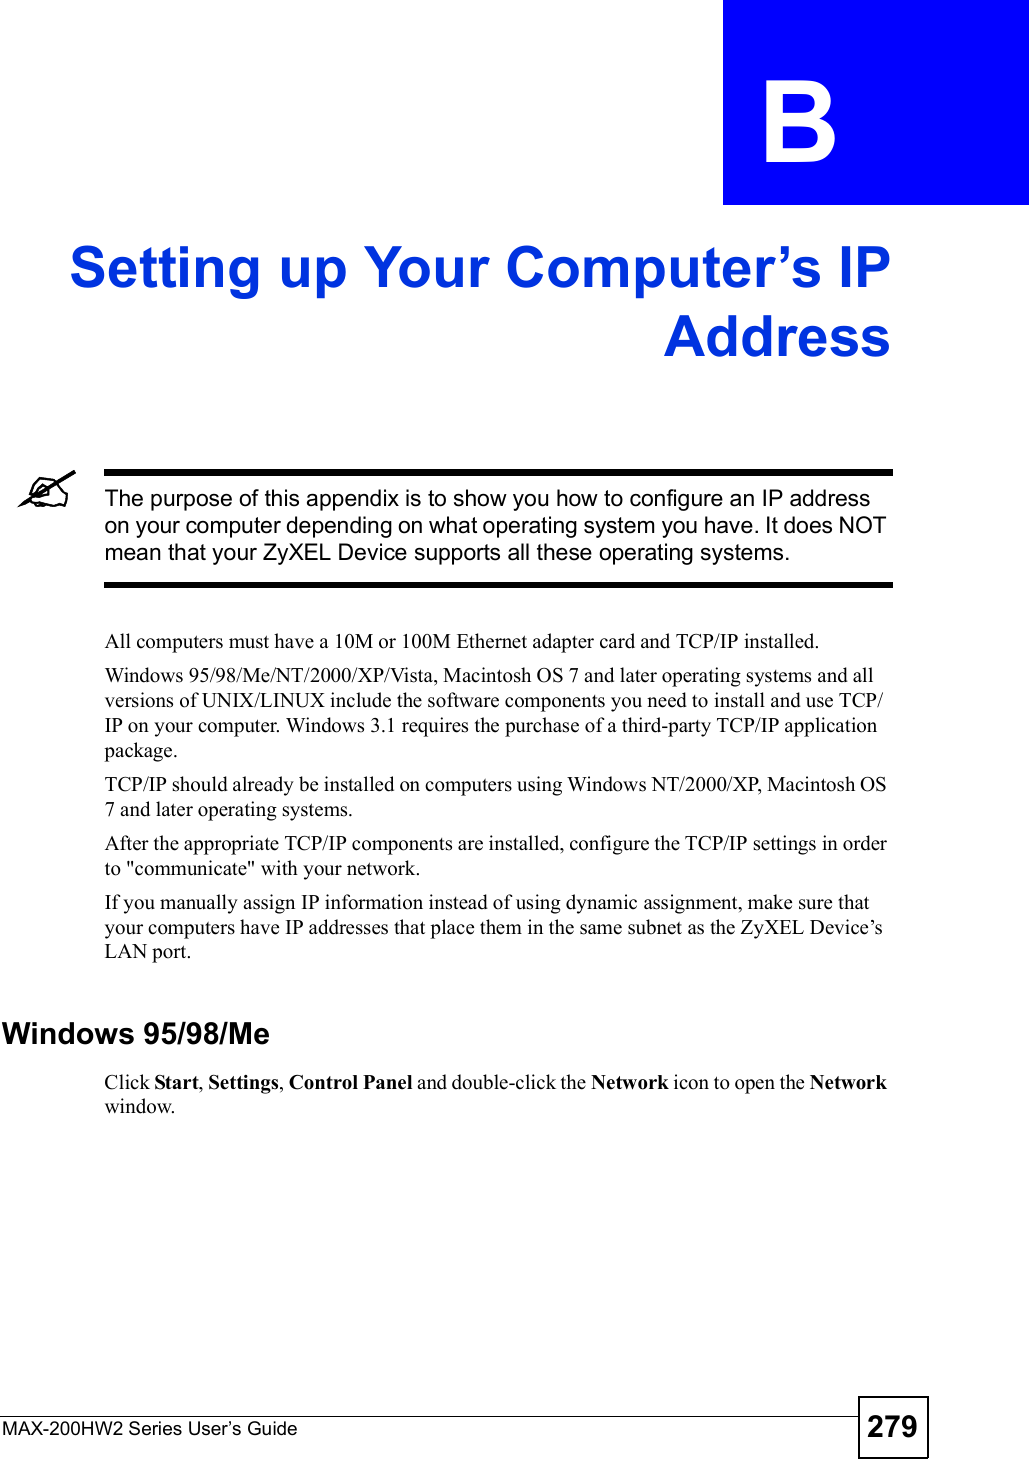 MAX-200HW2 Series User s Guide 279APPENDIX  B Setting up Your Computer s IPAddressThe purpose of this appendix is to show you how to configure an IP address on your computer depending on what operating system you have. It does NOT mean that your ZyXEL Device supports all these operating systems.All computers must have a 10M or 100M Ethernet adapter card and TCP/IP installed. Windows 95/98/Me/NT/2000/XP/Vista, Macintosh OS 7 and later operating systems and all versions of UNIX/LINUX include the software components you need to install and use TCP/IP on your computer. Windows 3.1 requires the purchase of a third-party TCP/IP application package.TCP/IP should already be installed on computers using Windows NT/2000/XP, Macintosh OS 7 and later operating systems.After the appropriate TCP/IP components are installed, configure the TCP/IP settings in order to &quot;communicate&quot; with your network. If you manually assign IP information instead of using dynamic assignment, make sure that your computers have IP addresses that place them in the same subnet as the ZyXEL Device!s LAN port.Windows 95/98/MeClick Start,Settings,Control Panel and double-click the Network icon to open the Network window.